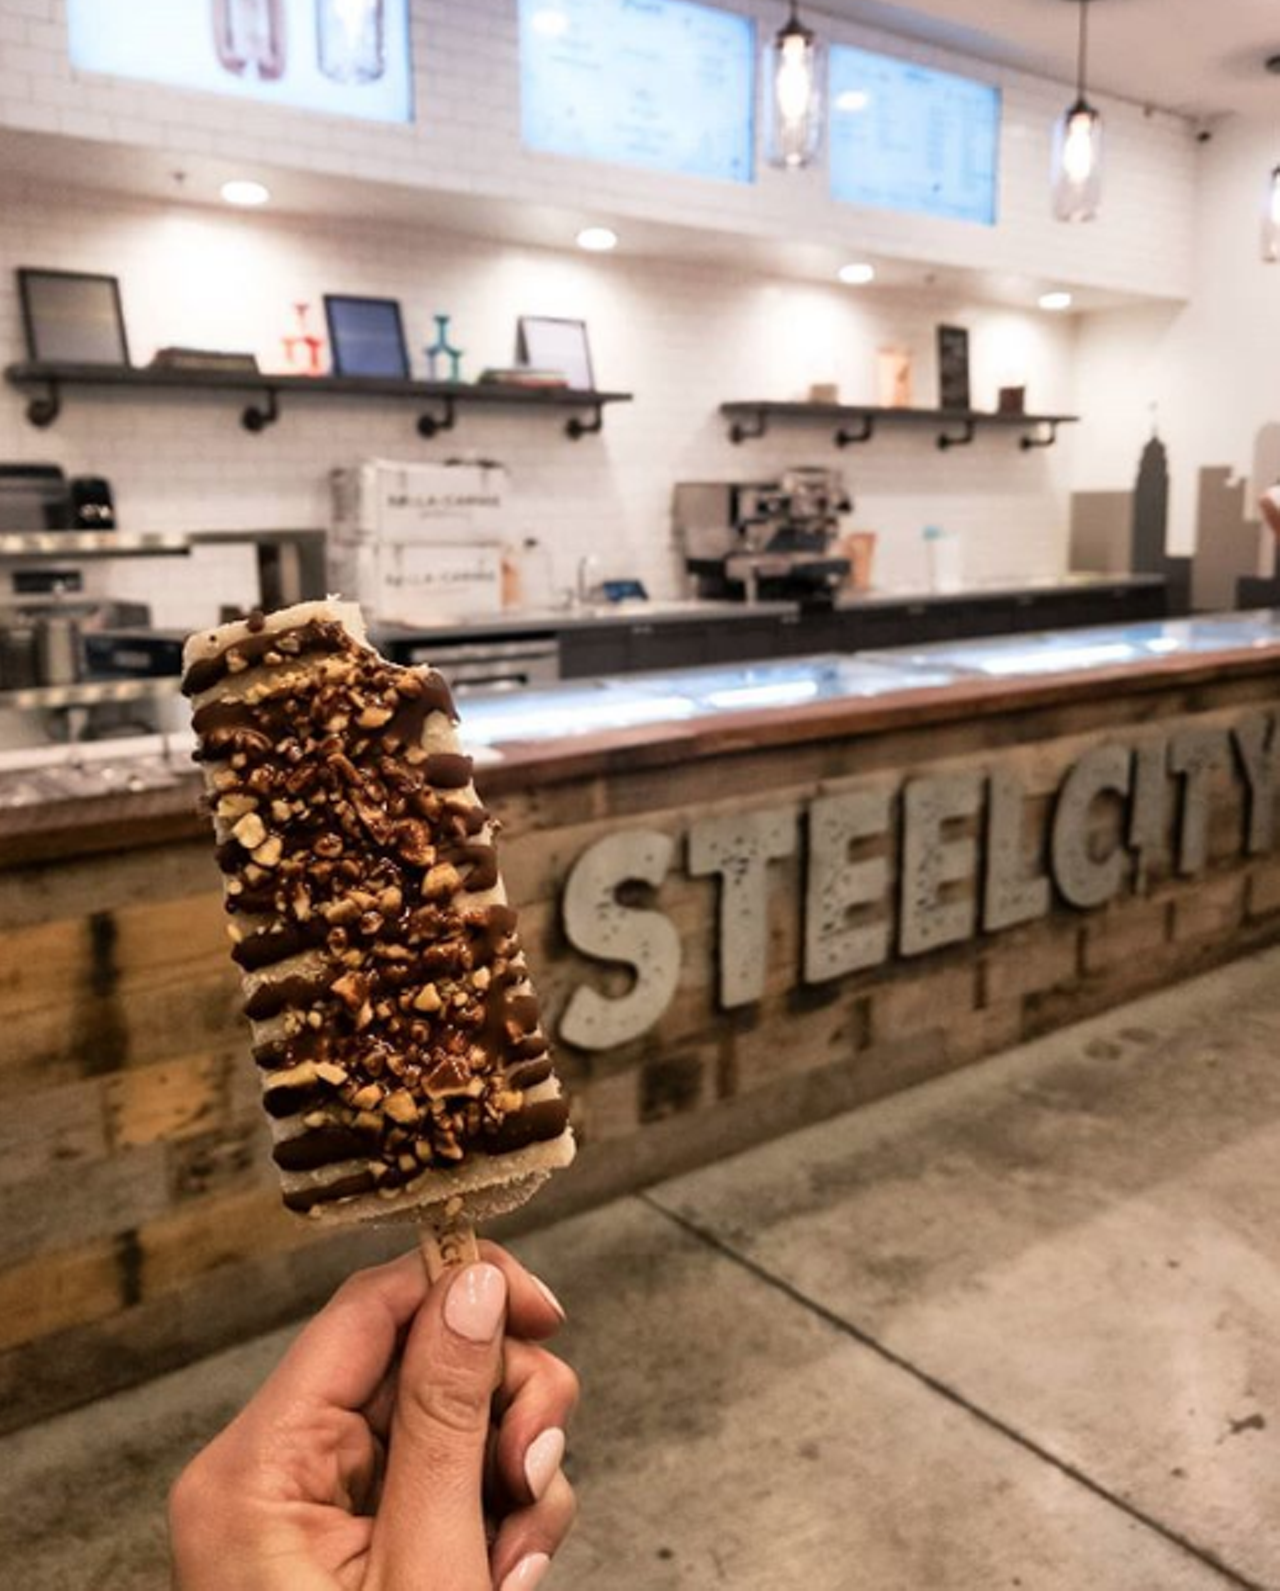 Steel City Pops
Both of SA’s Steel City Pops locations, one downtown and another at La Cantera, suddenly closed on October 31. Owner Jim Watkins said the stores weren’t profitable enough, but thanked the city for its support through the years.
Photo via Instagram / ritawinthrop